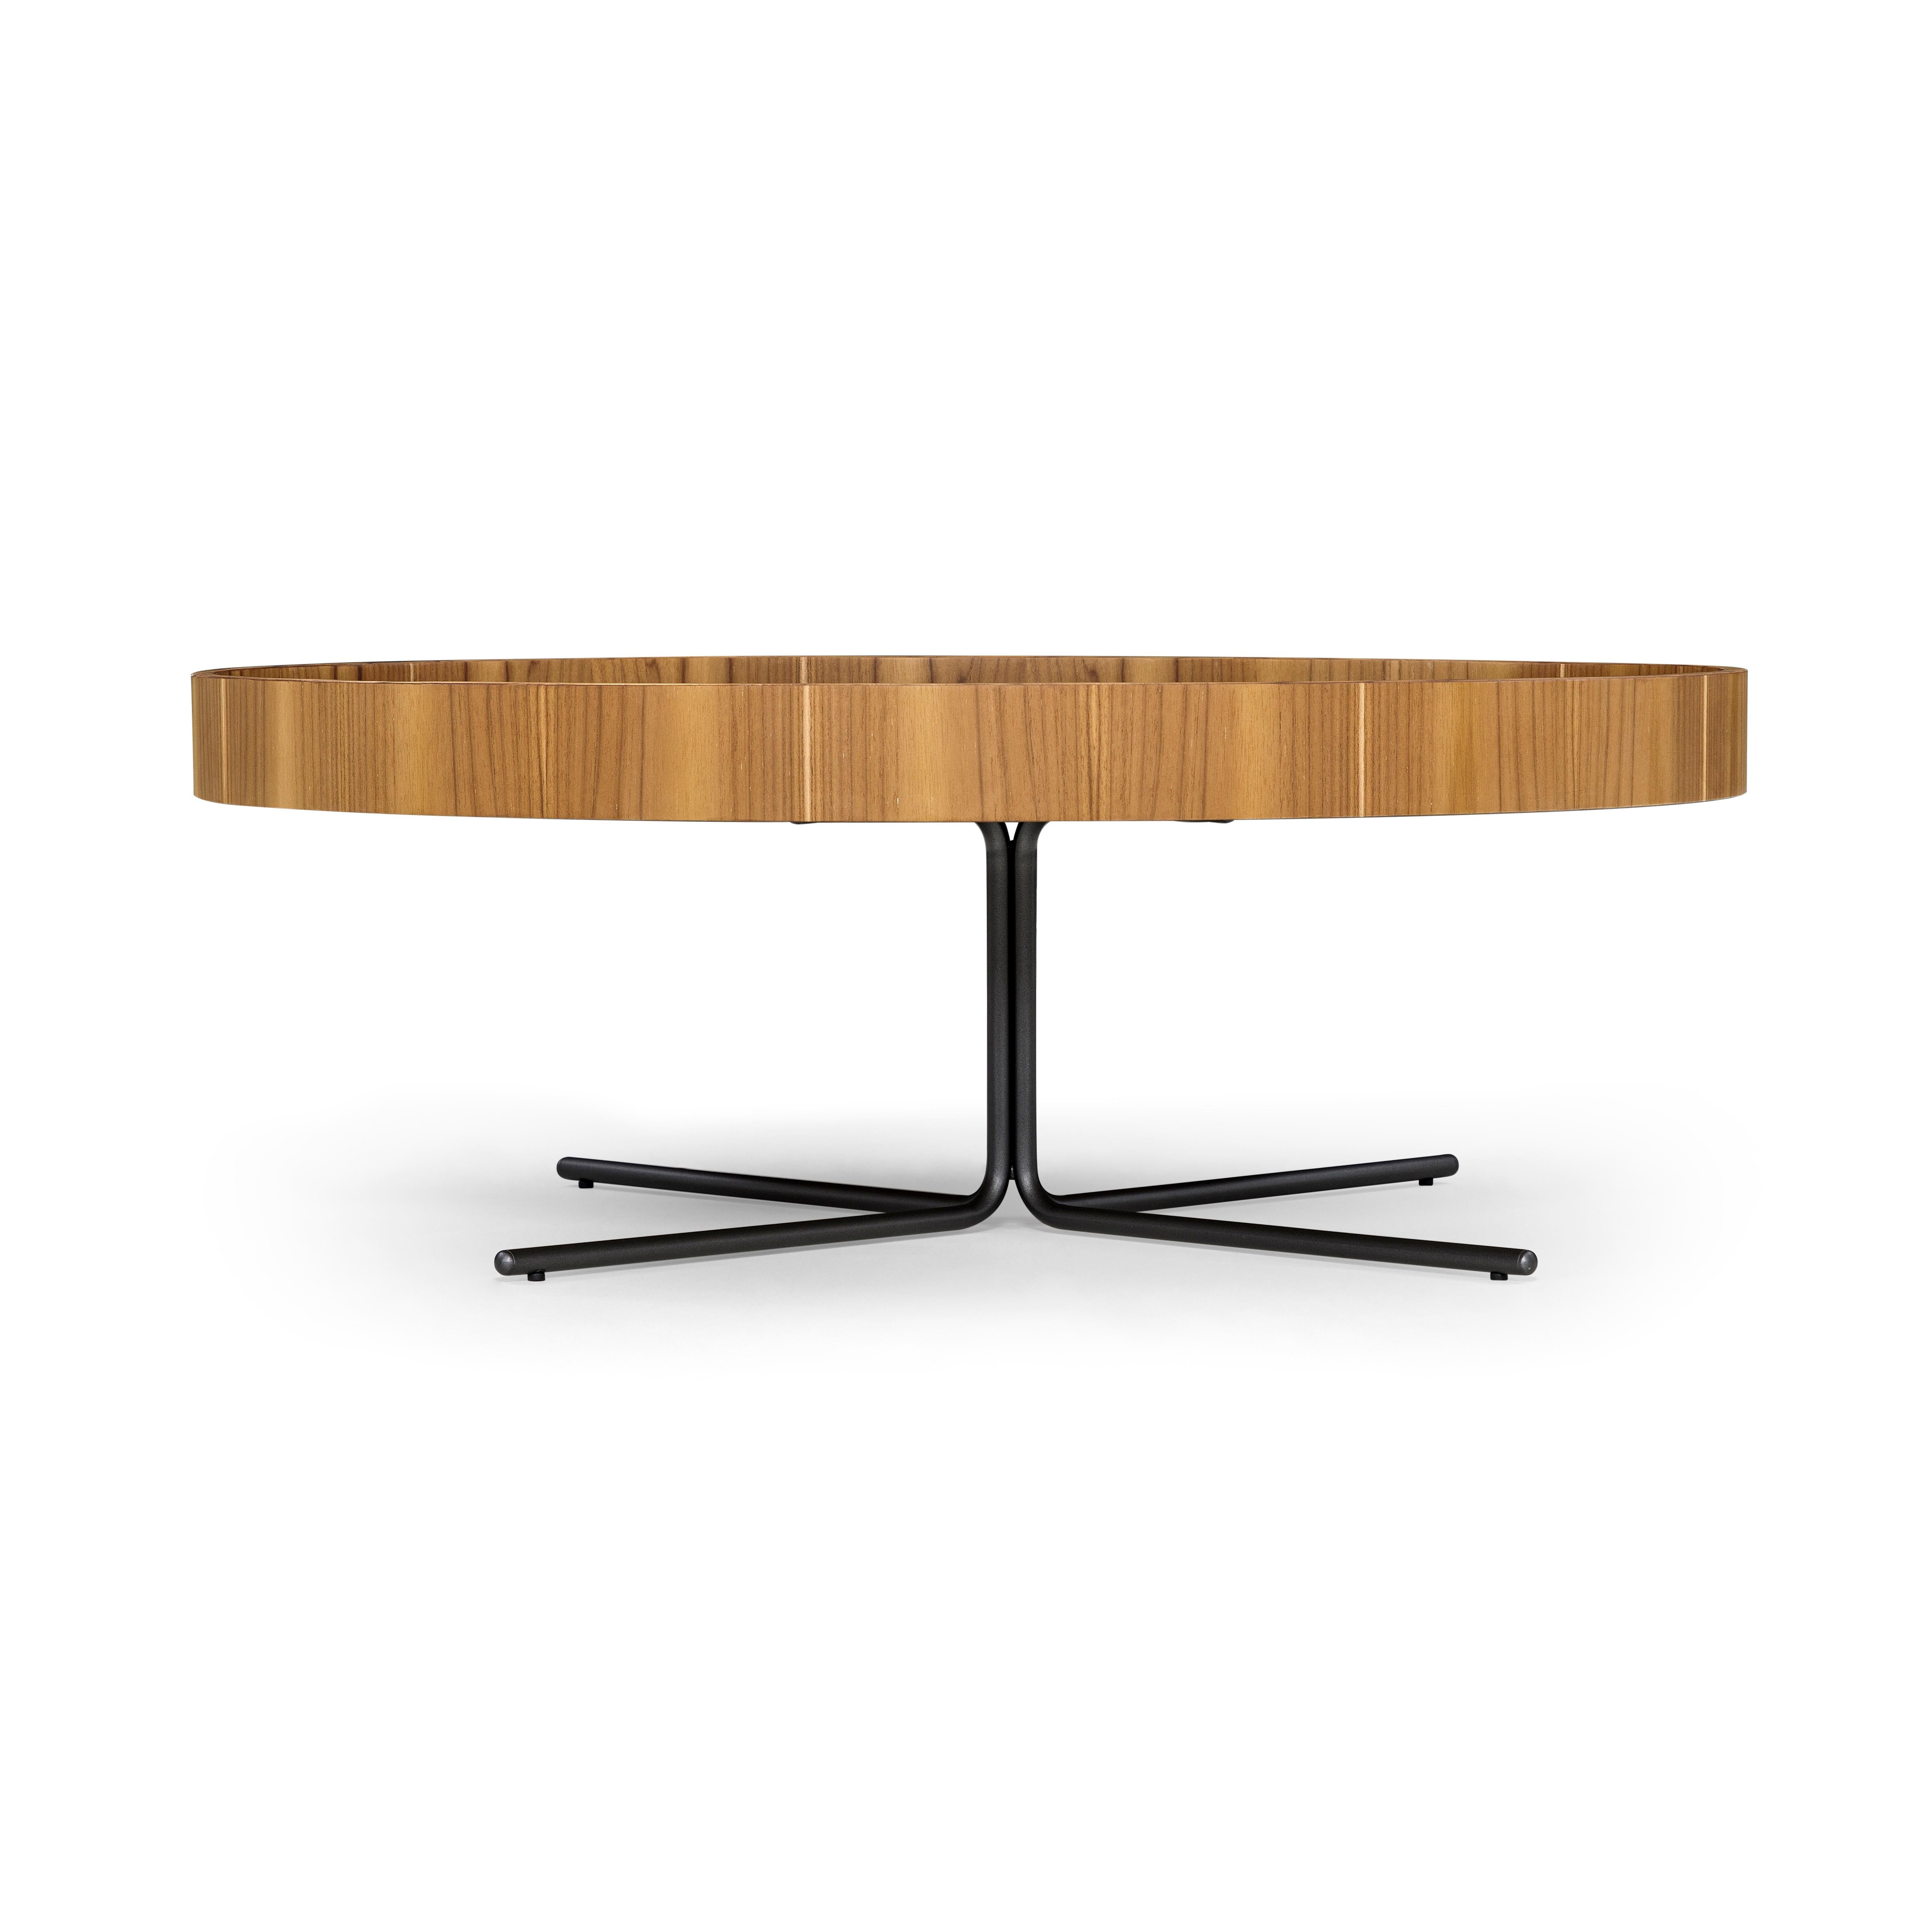 The stunning Regia occasional table consists of a tabletop in black Nero glass, a Teak rim, and stainless steel legs with a polished finish. The Regia table is yet another minimalist or contemporary fashion statement from Uultis that will help